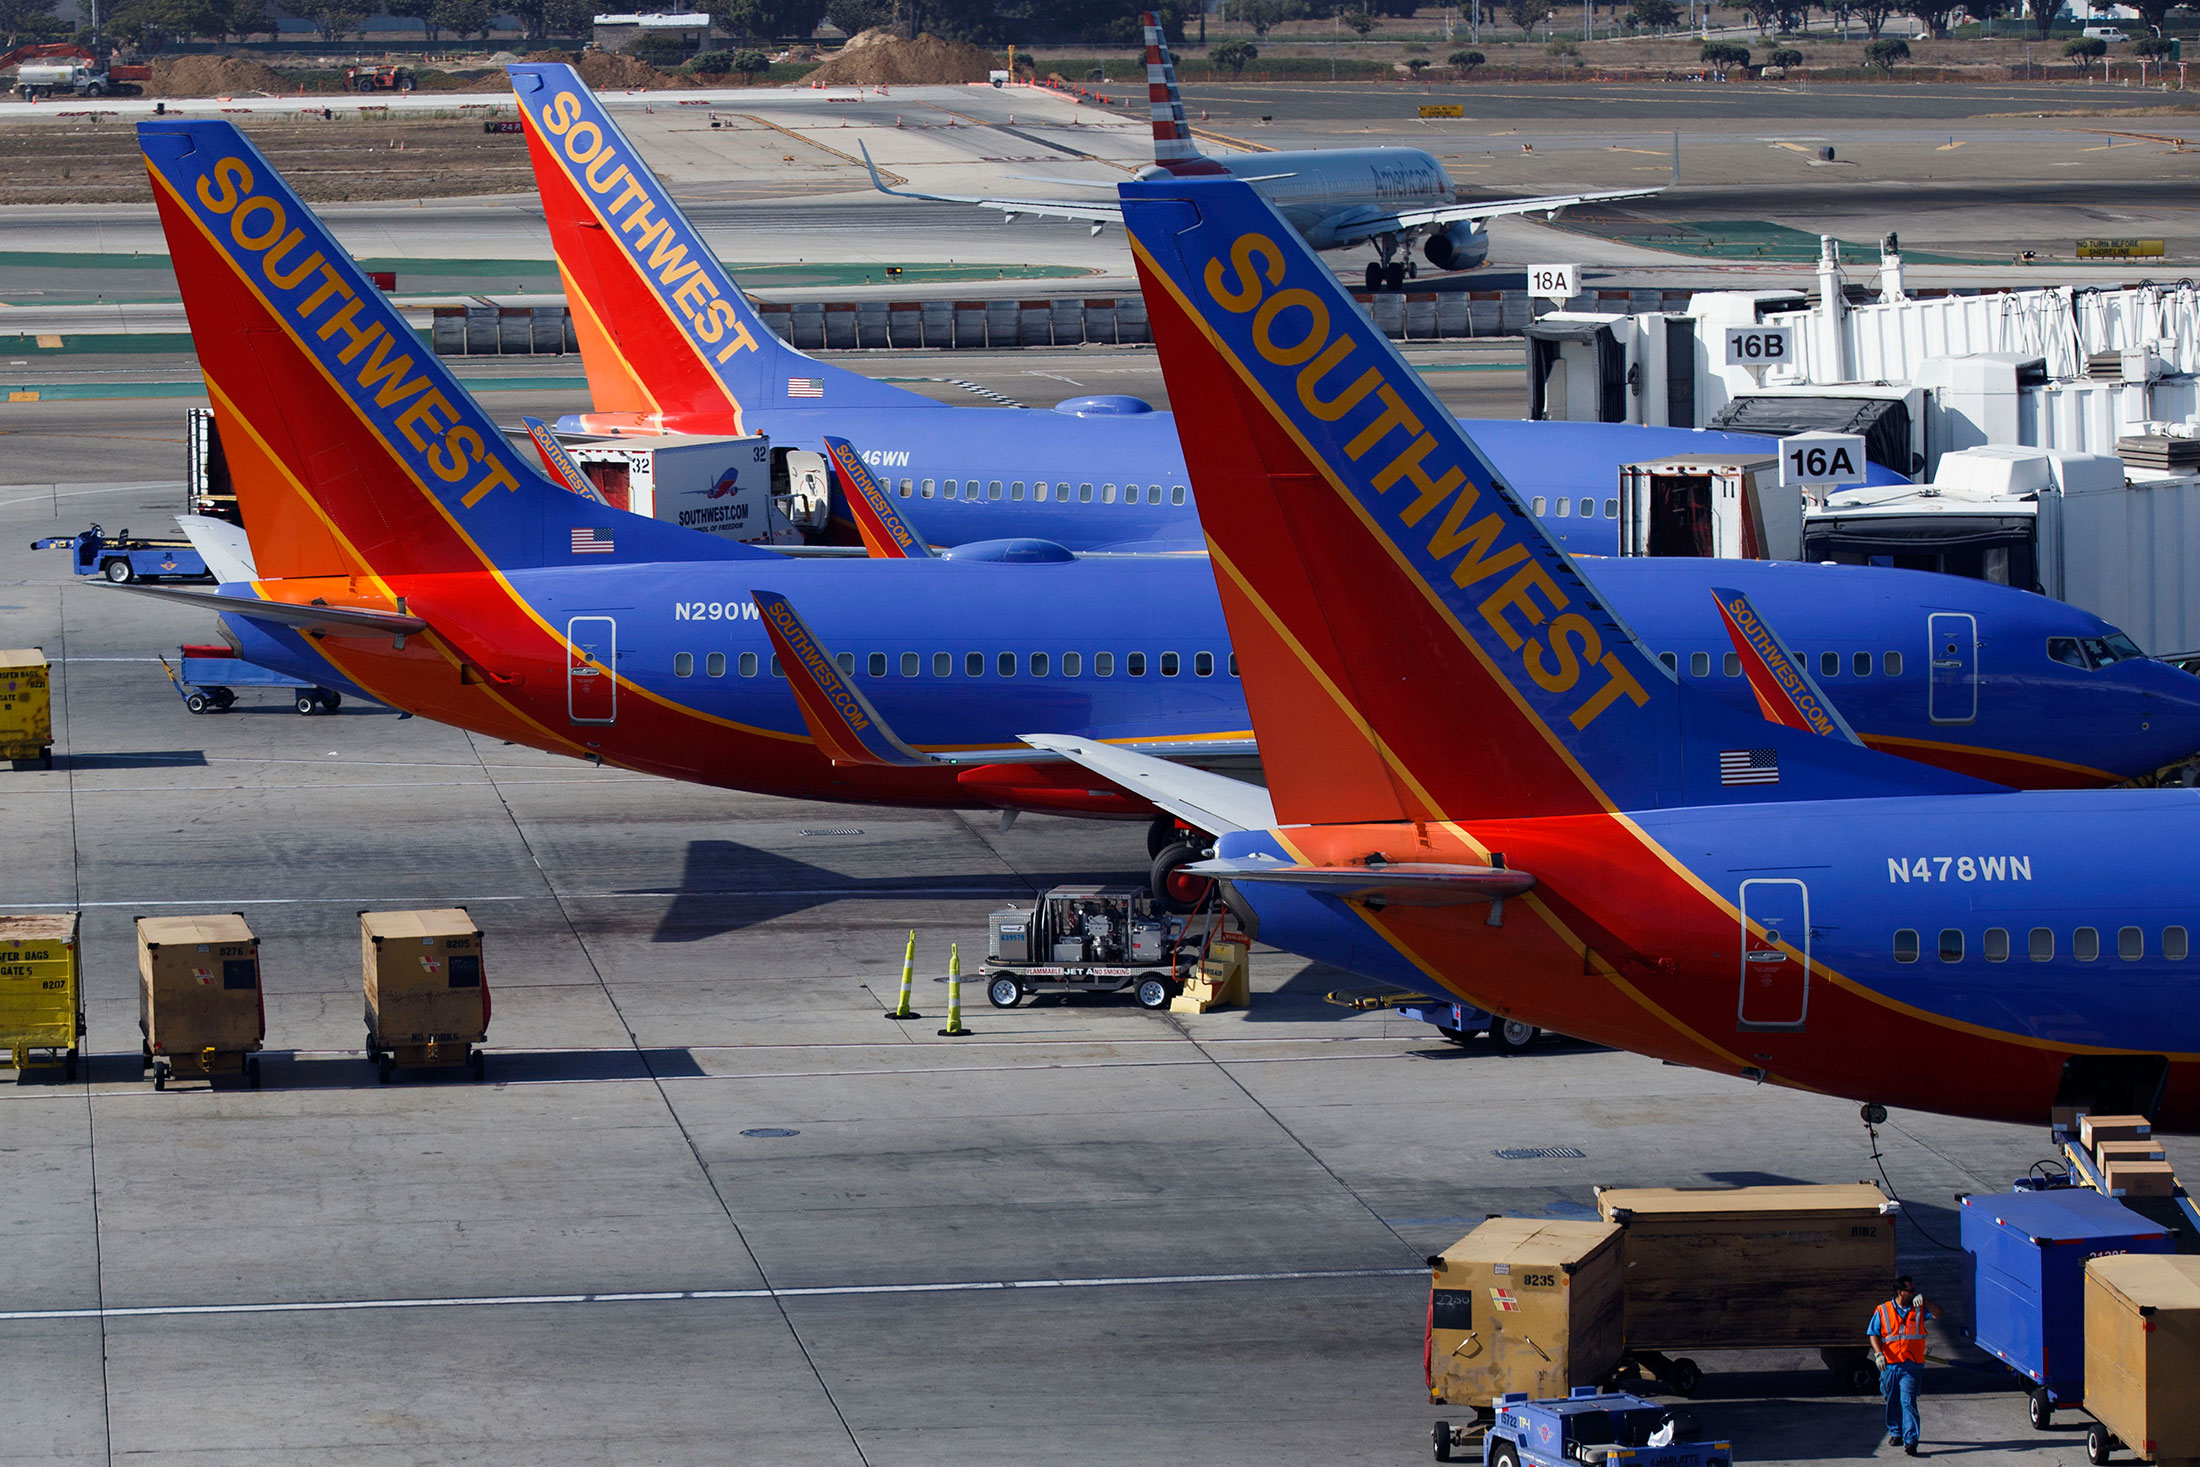 Southwest Airlines Co. Boeing 737 aircraft stand at their gates at Terminal 1 of Los Angeles International Airport (LAX) in Los Angeles, California, U.S., on Tuesday, August 18, 2015.
